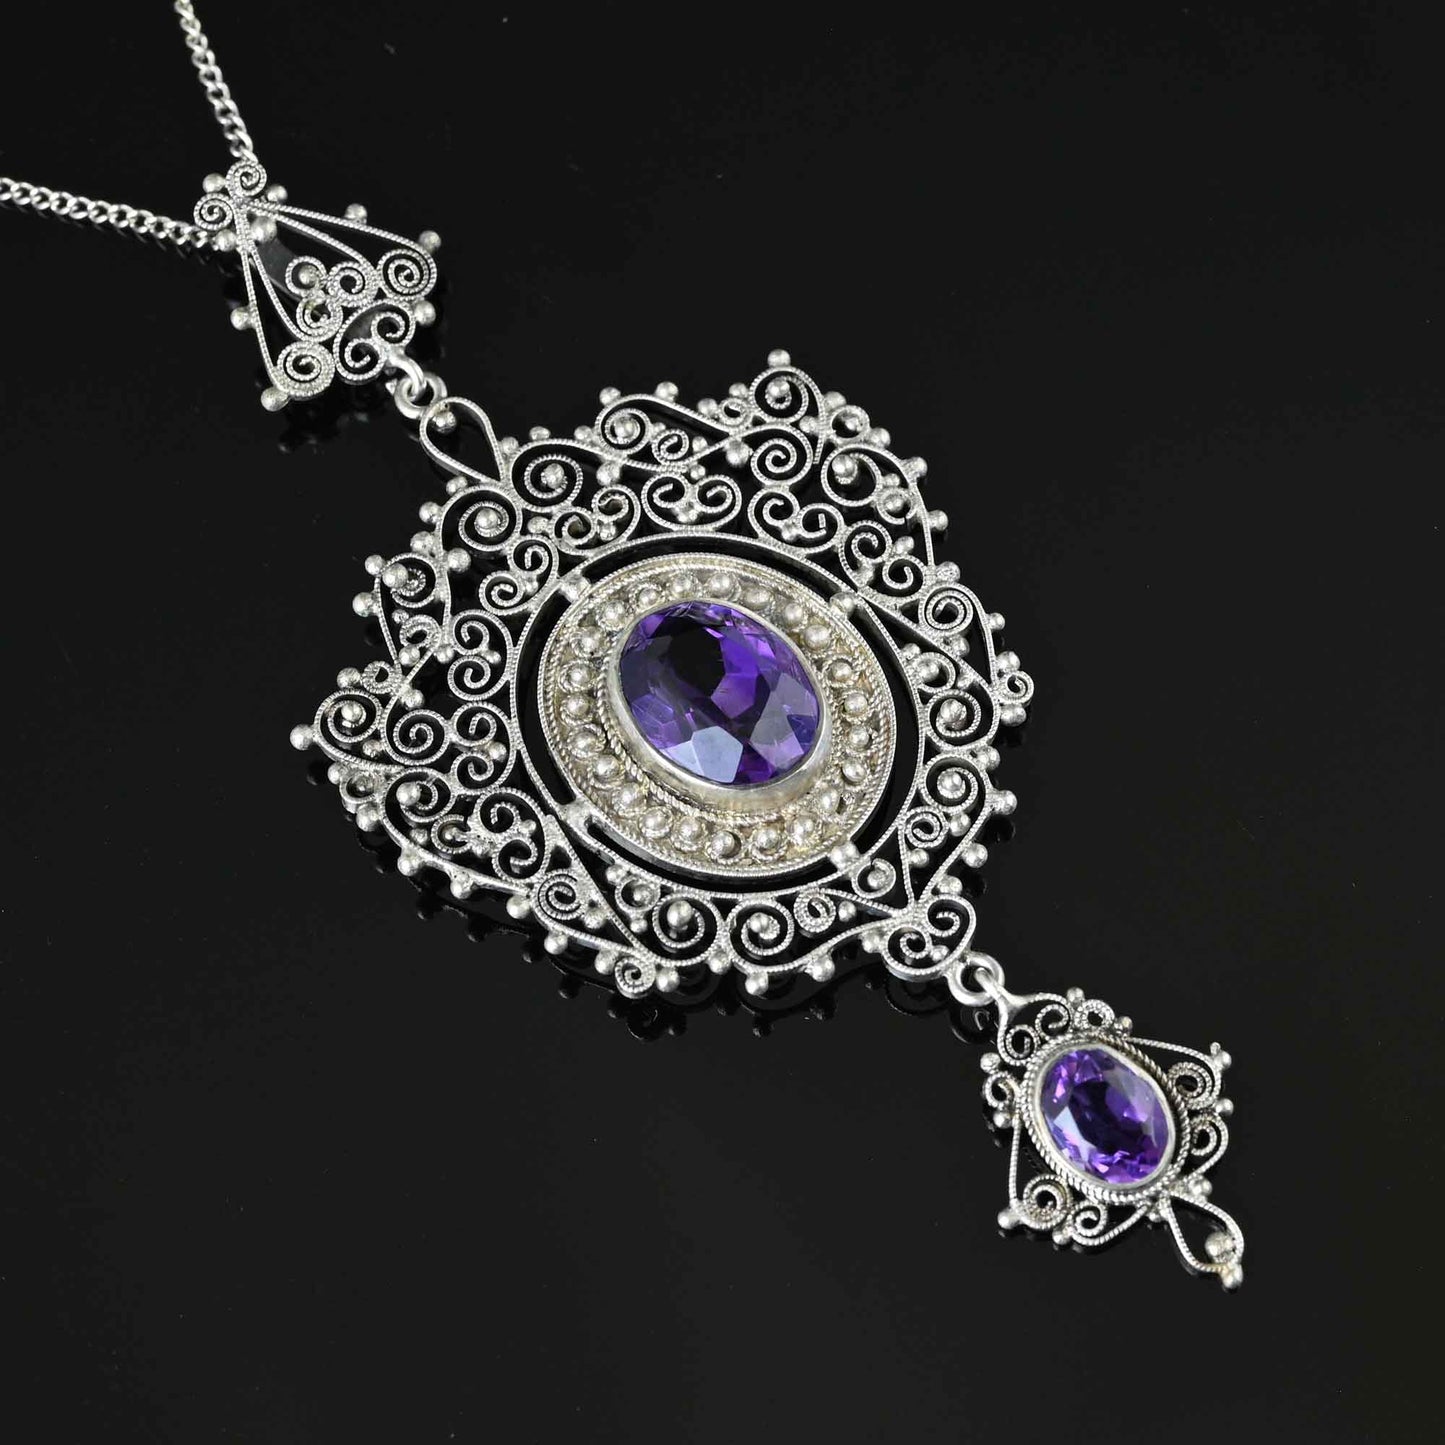 Antique Victorian Silver Filigree Amethyst Necklace - 925 Sterling Silver Necklace